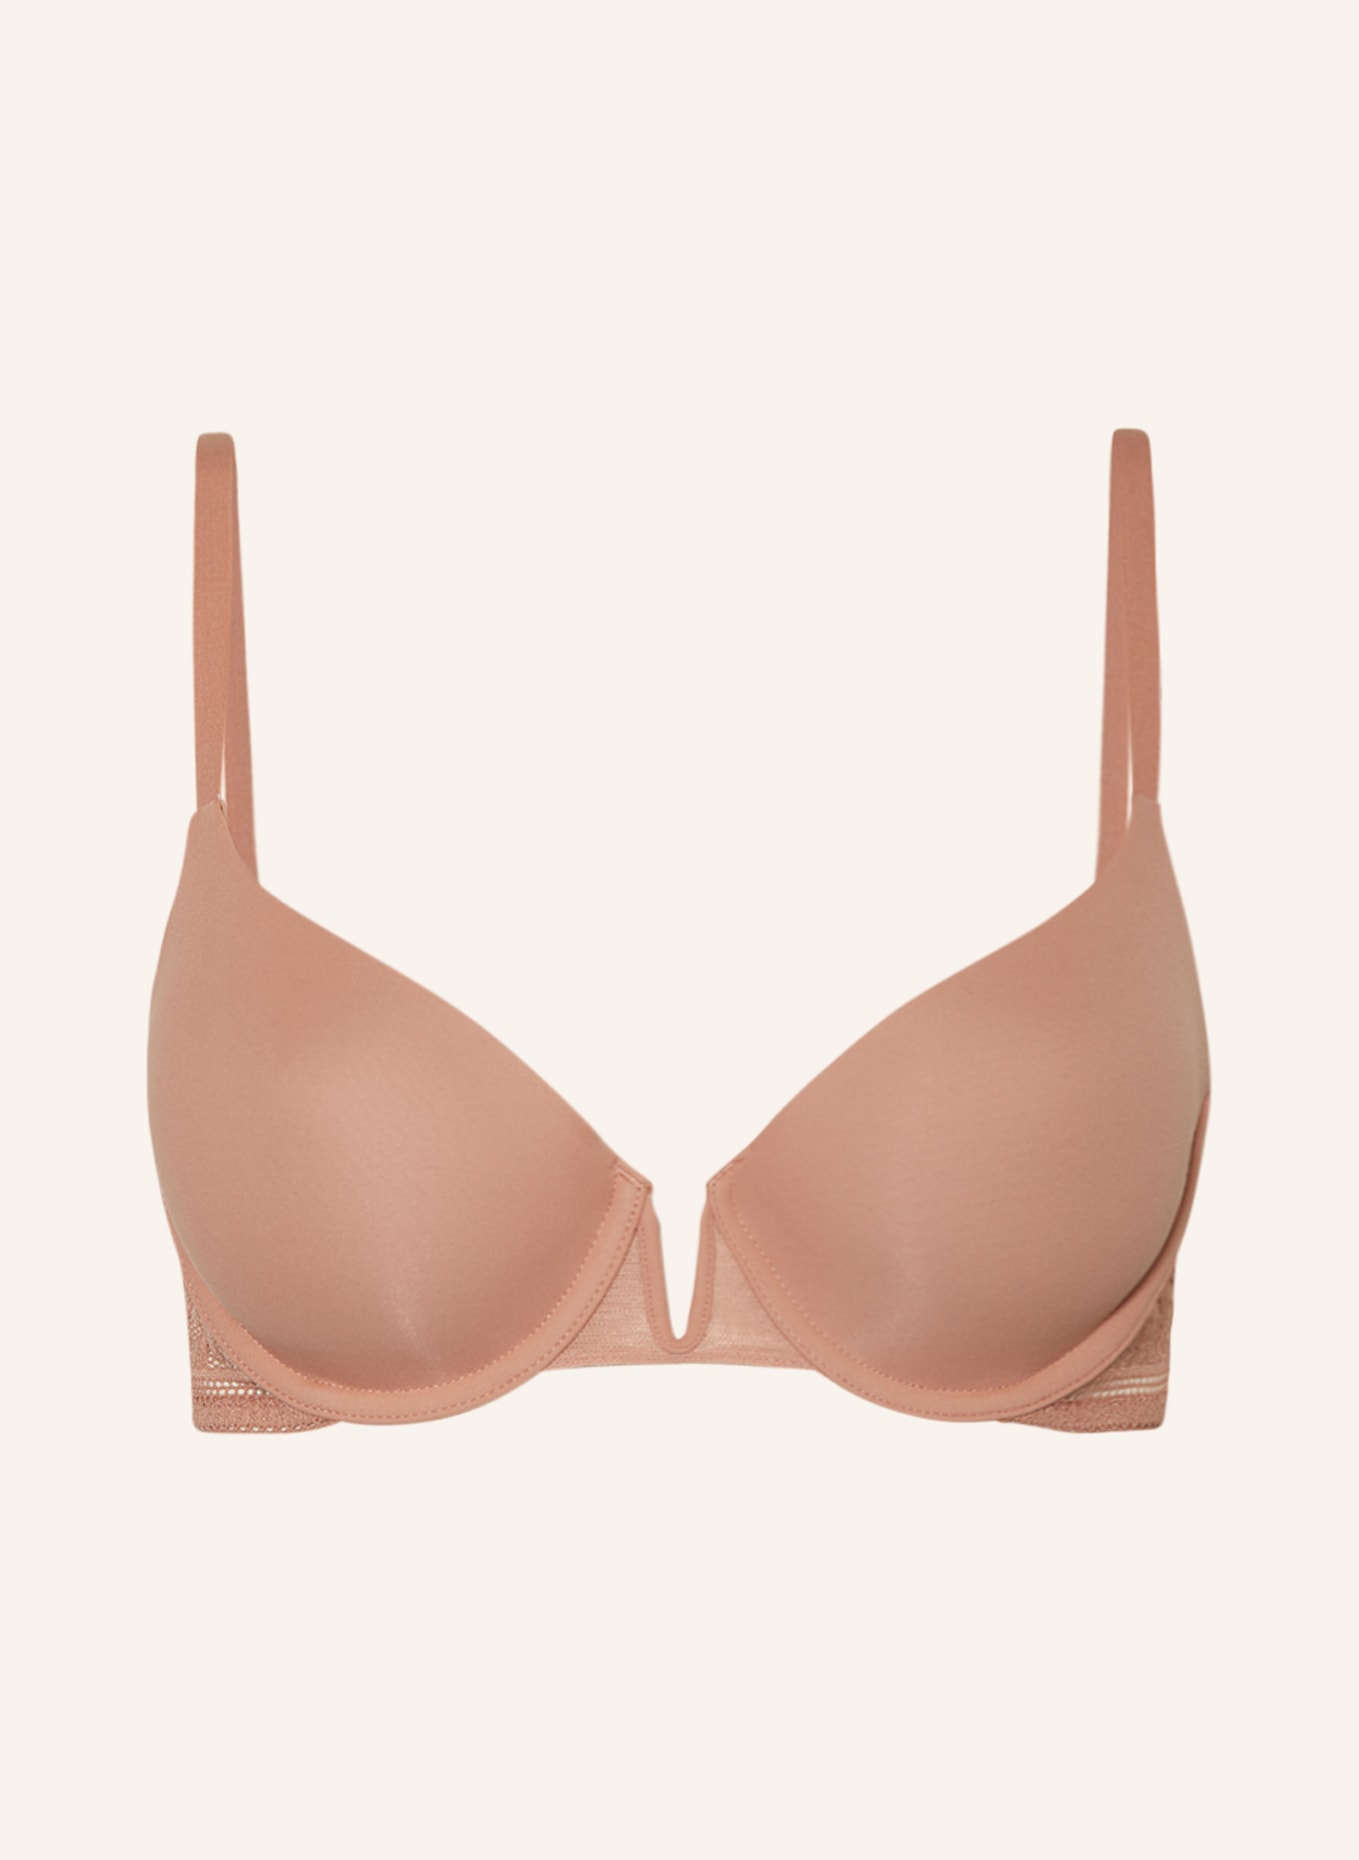 Wolford Molded cup bra LIGHTLY LINED DEMI in salmon